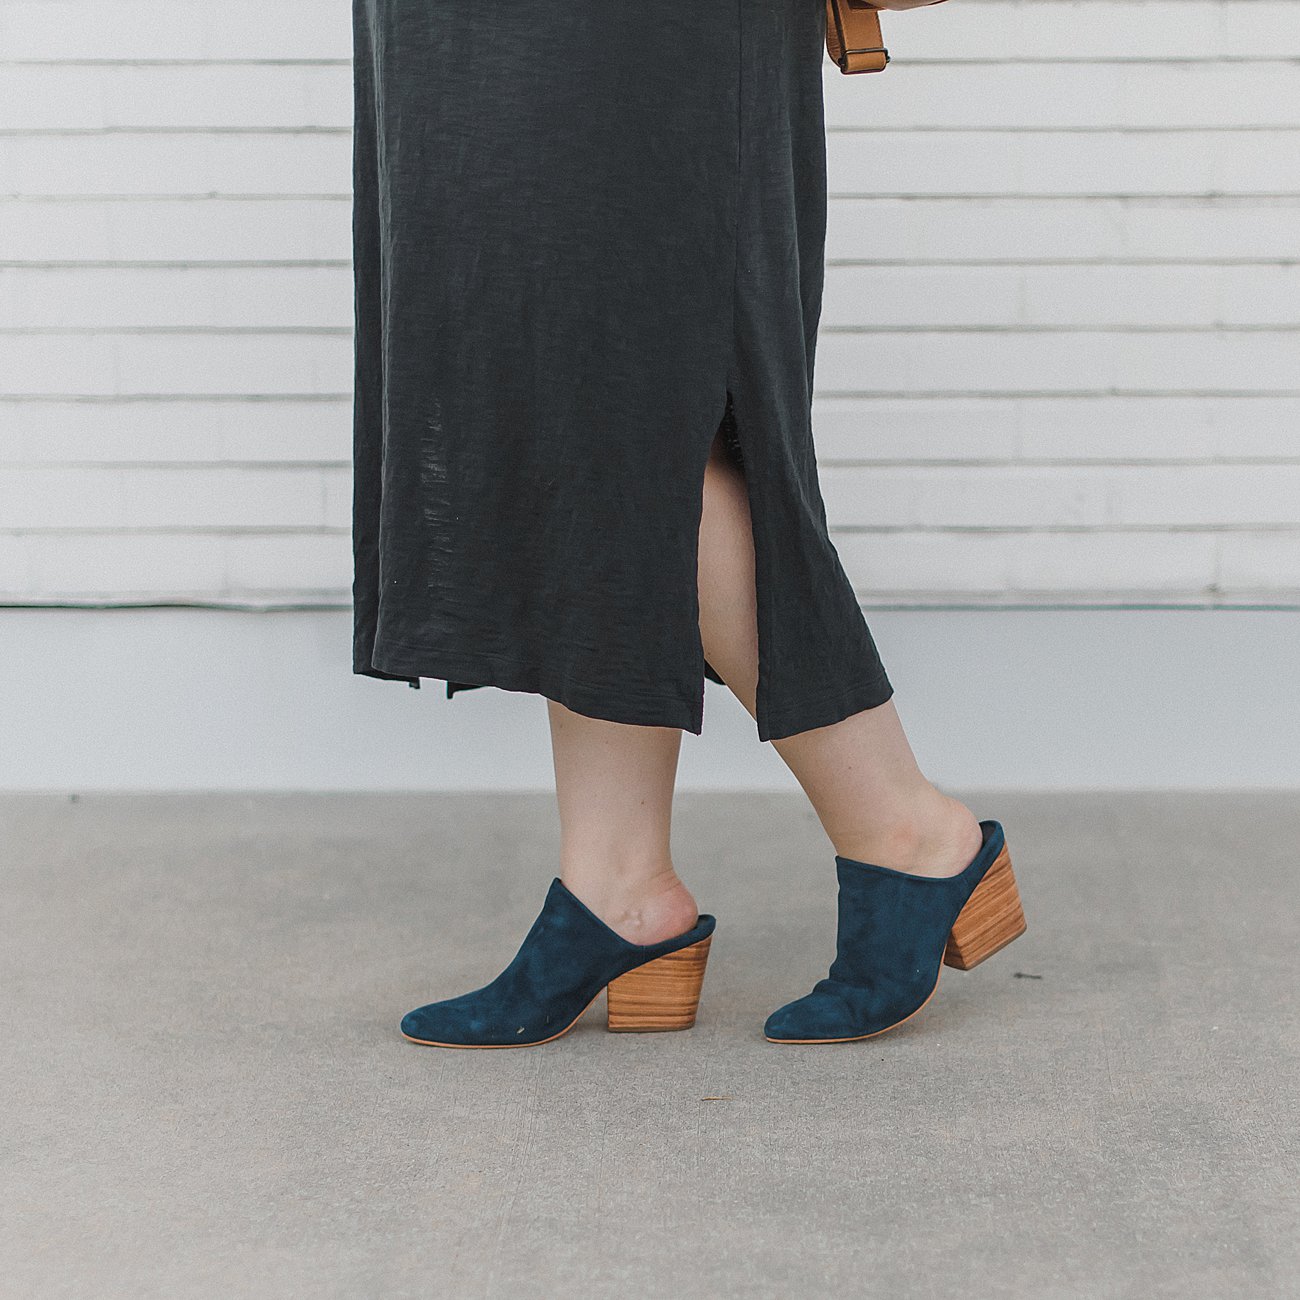 ABLE Utility Dress, ABLE denim jacket, ABLE rojas mule shoes - ethical fall fashion - how to style a t-shirt dress (9)